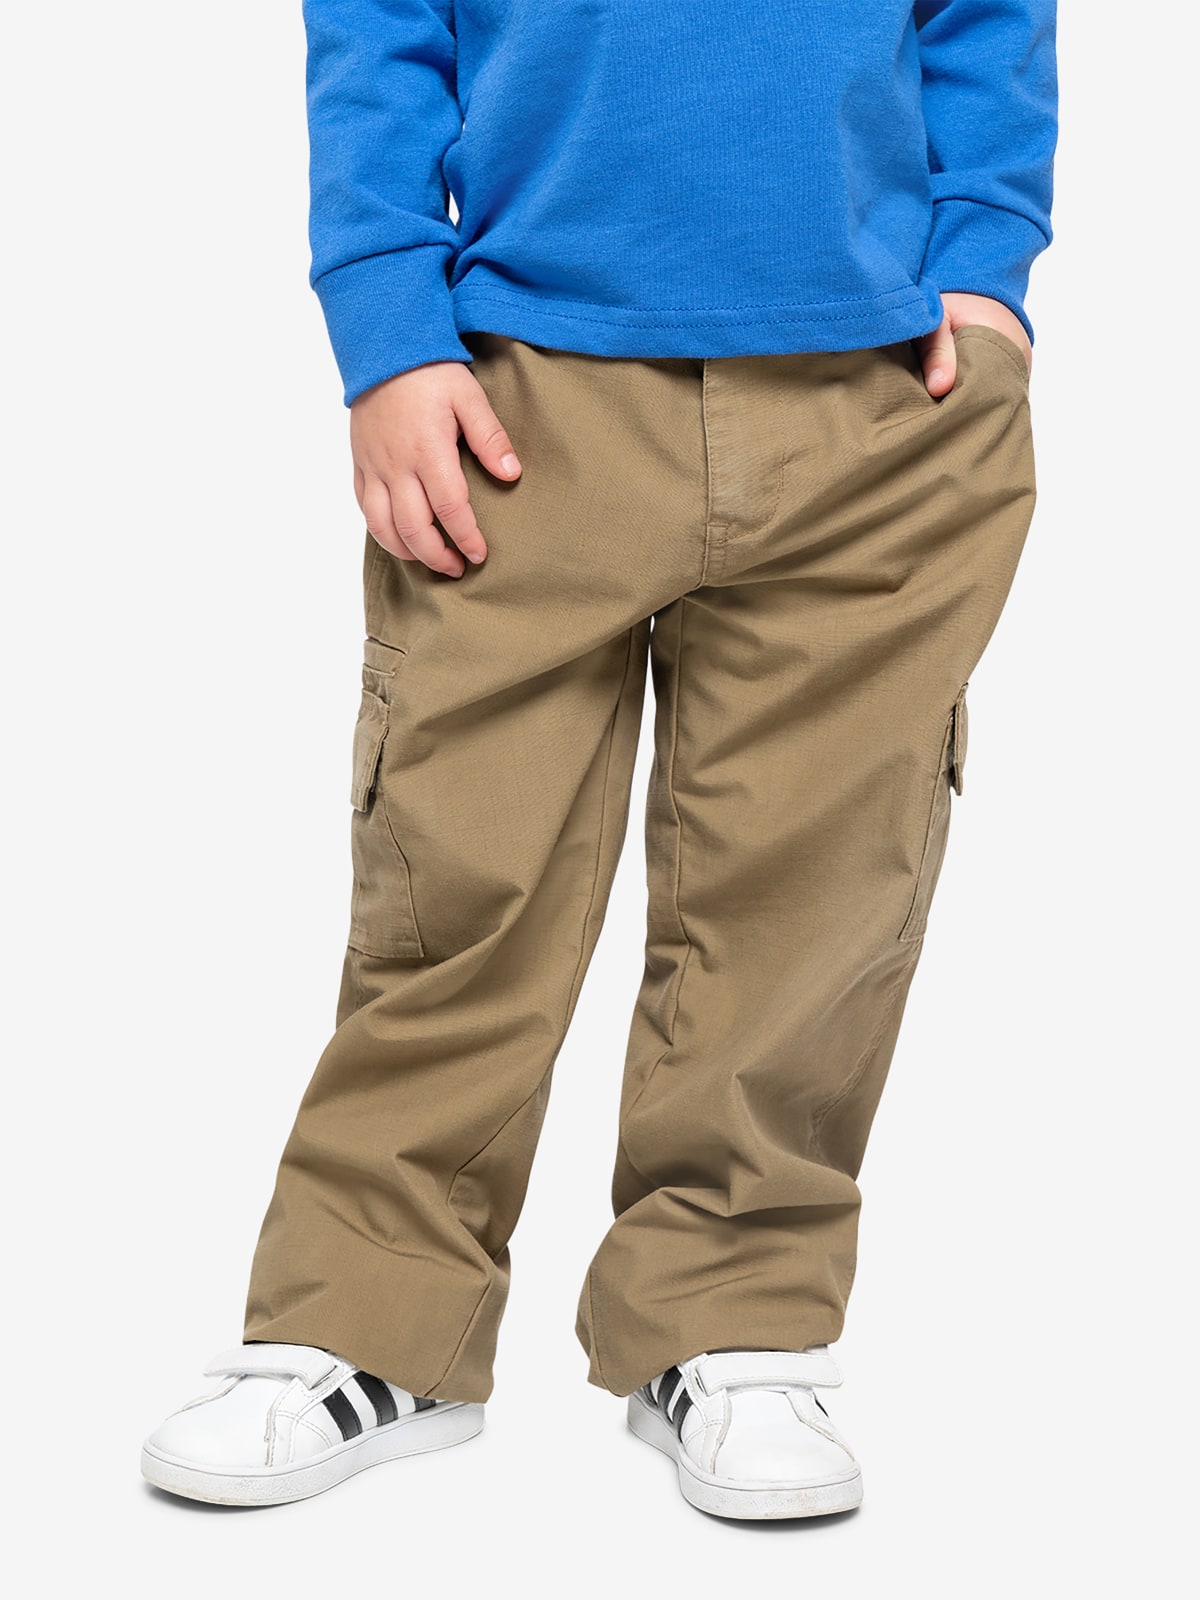 Insect Shield Little Boys' Performance Ripstop Pants